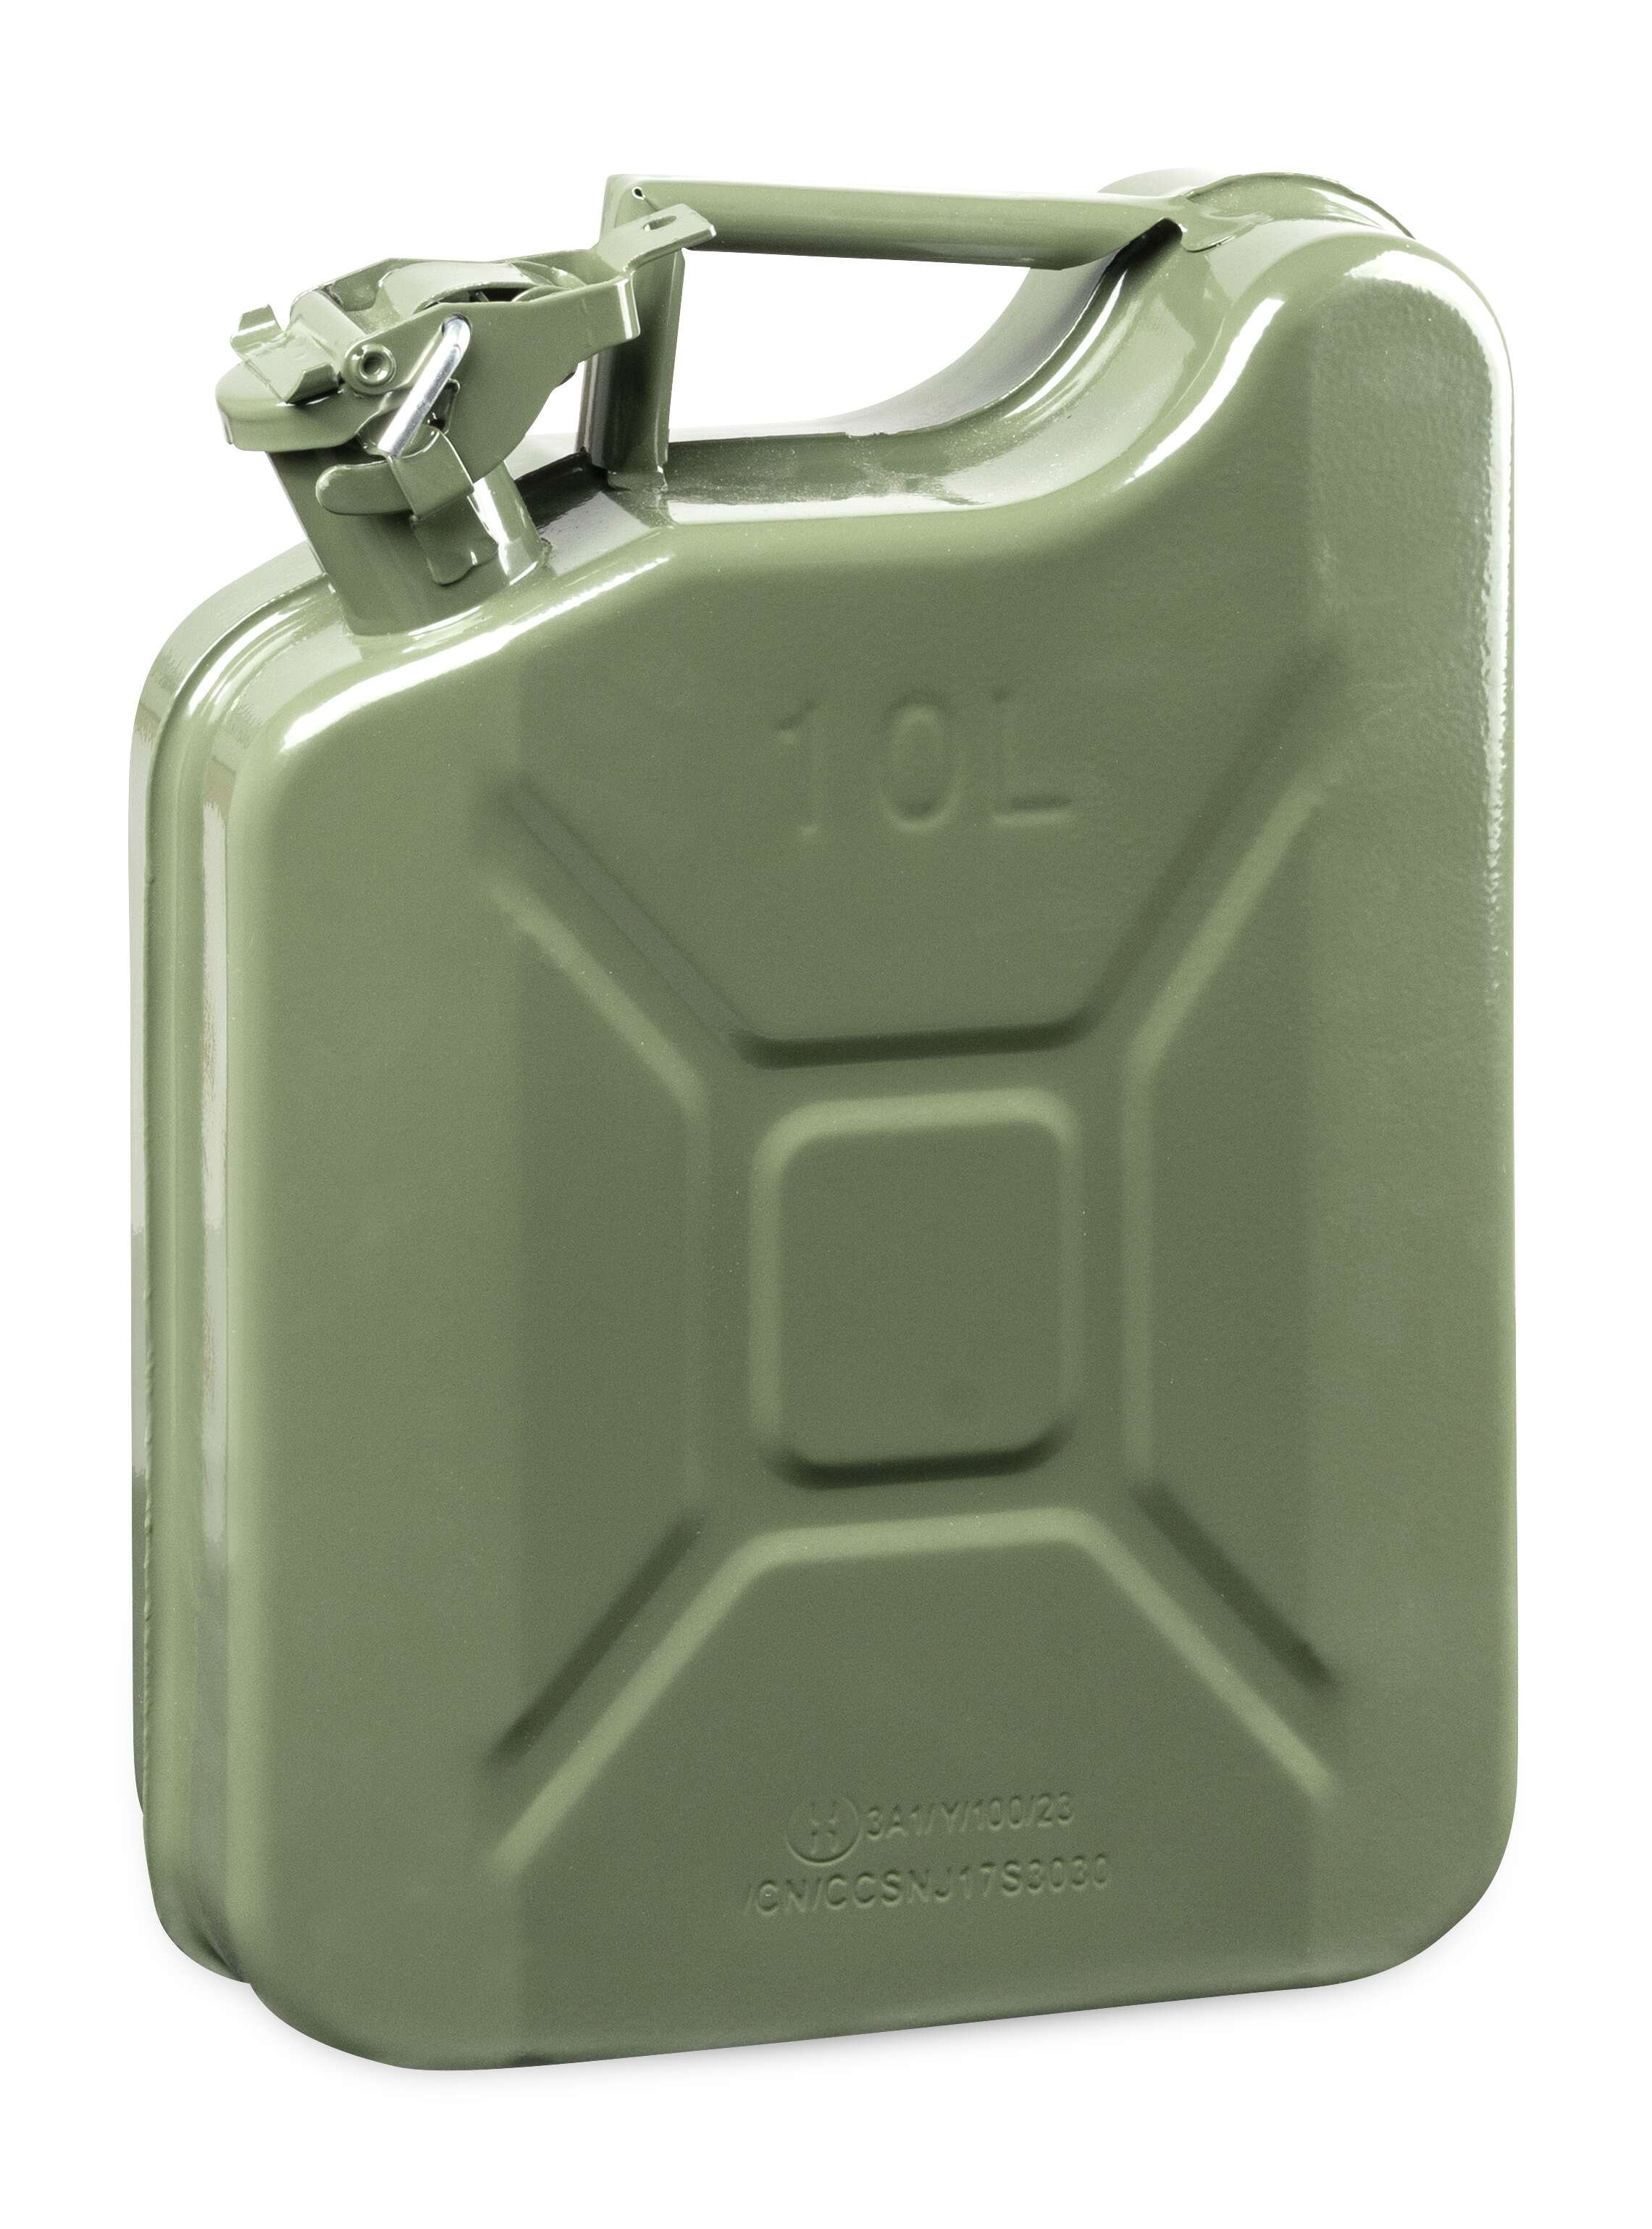 Petrol canister metal 10 litres, fuel canister, UN-certified diesel canister with safety cap 3A1 olive green, 30x13x40,5 cm